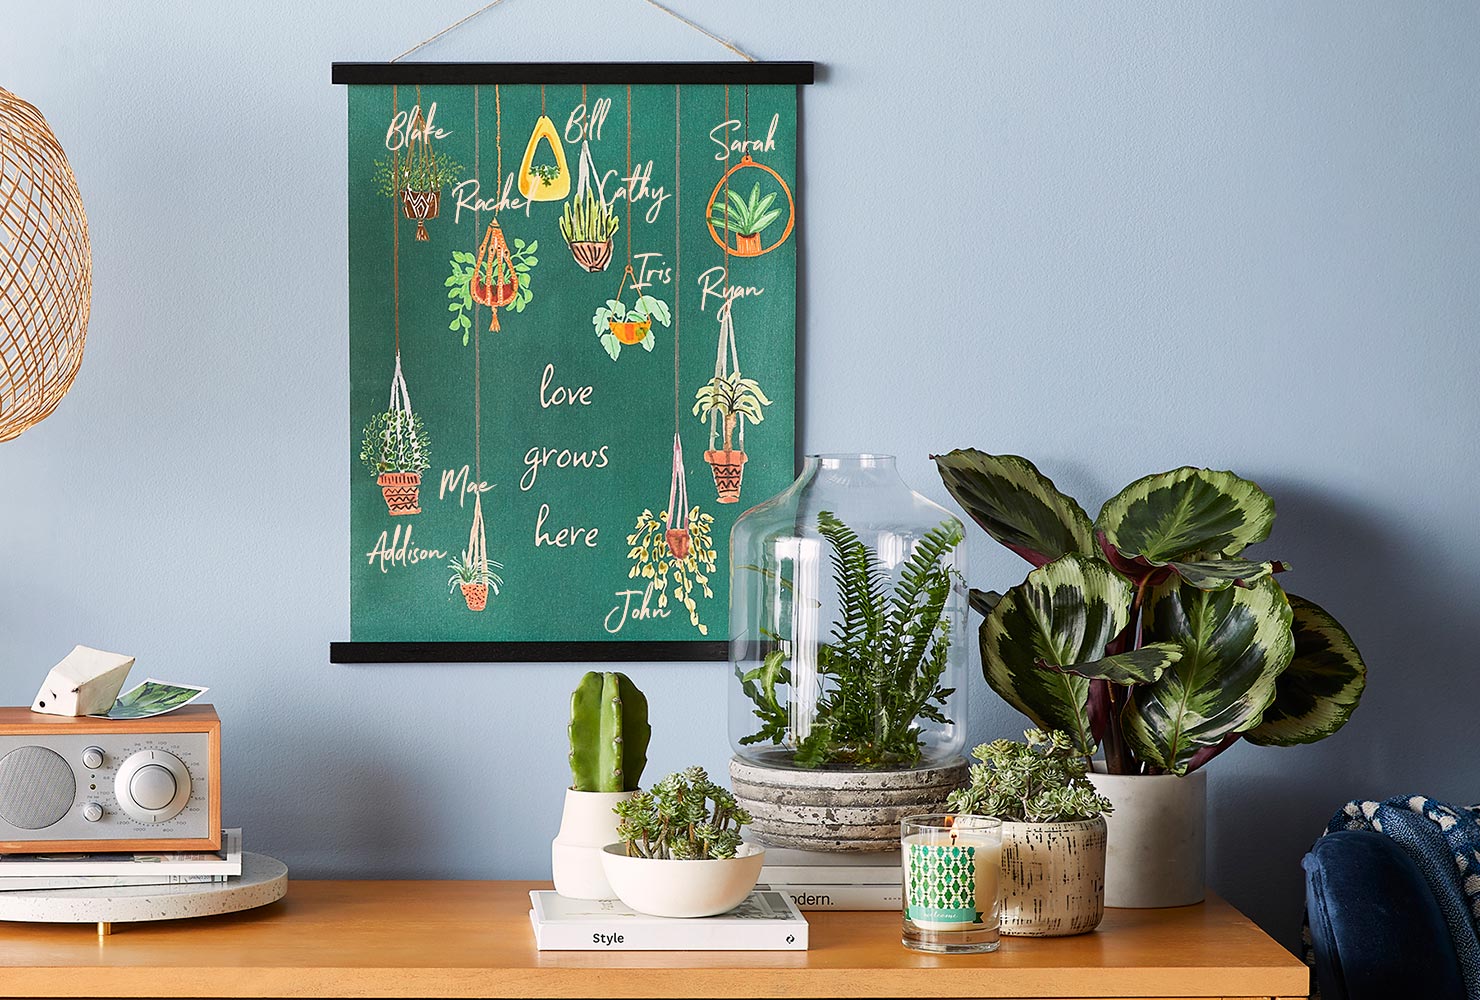 Art print with hanging planter and family names.